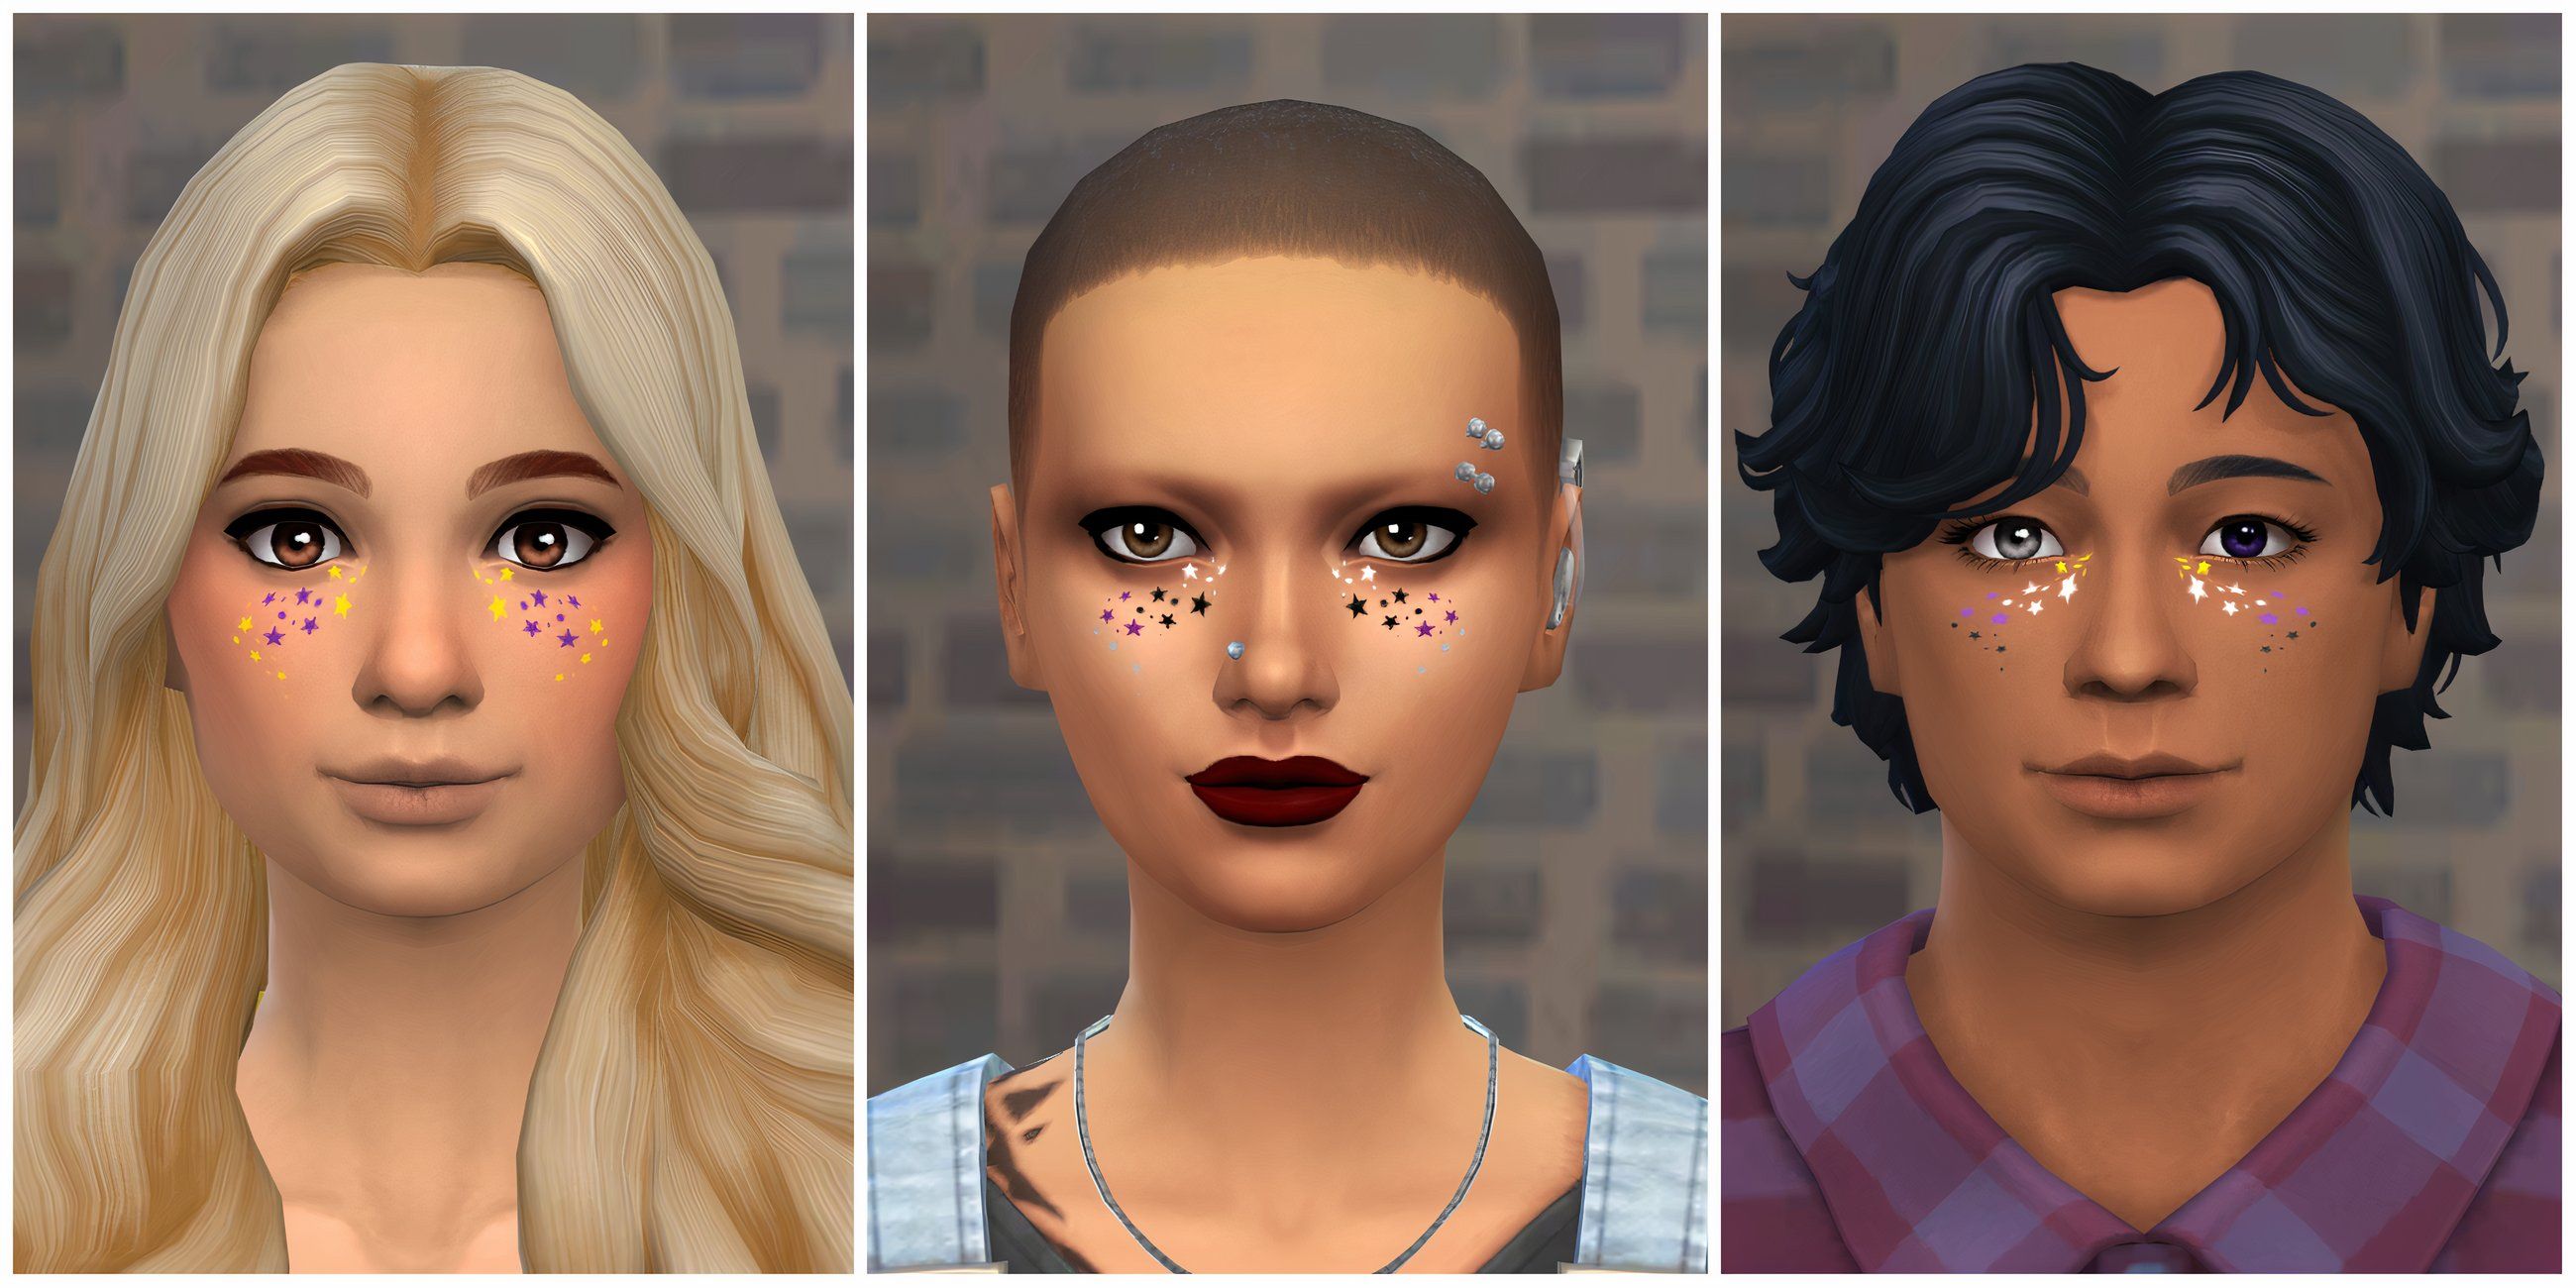 Sims with pride makeup from the Pridedust Facepaint mod